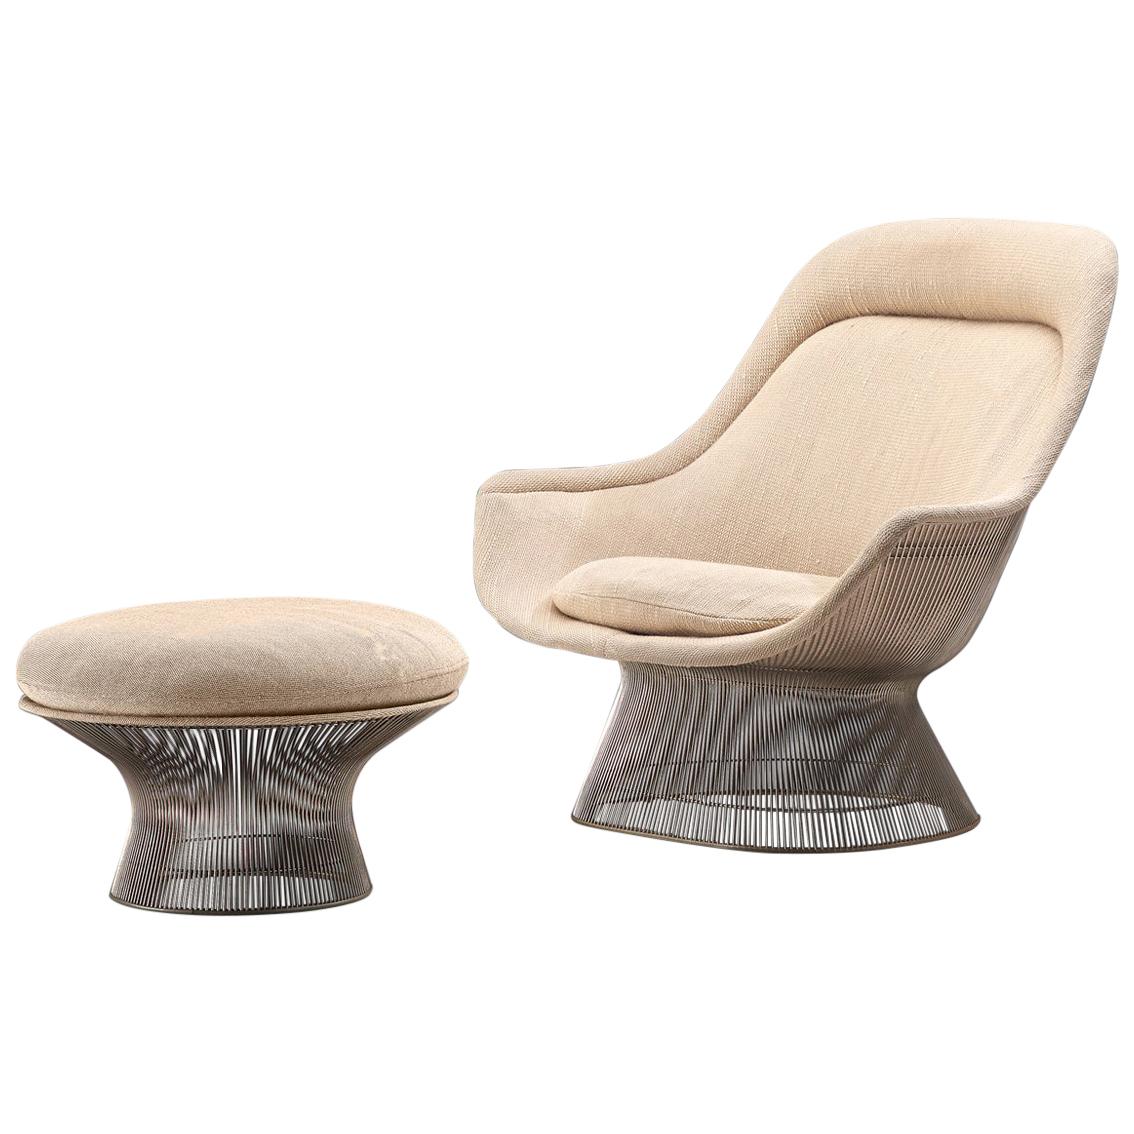 Warren Platner Easy Chair and Ottoman for Knoll